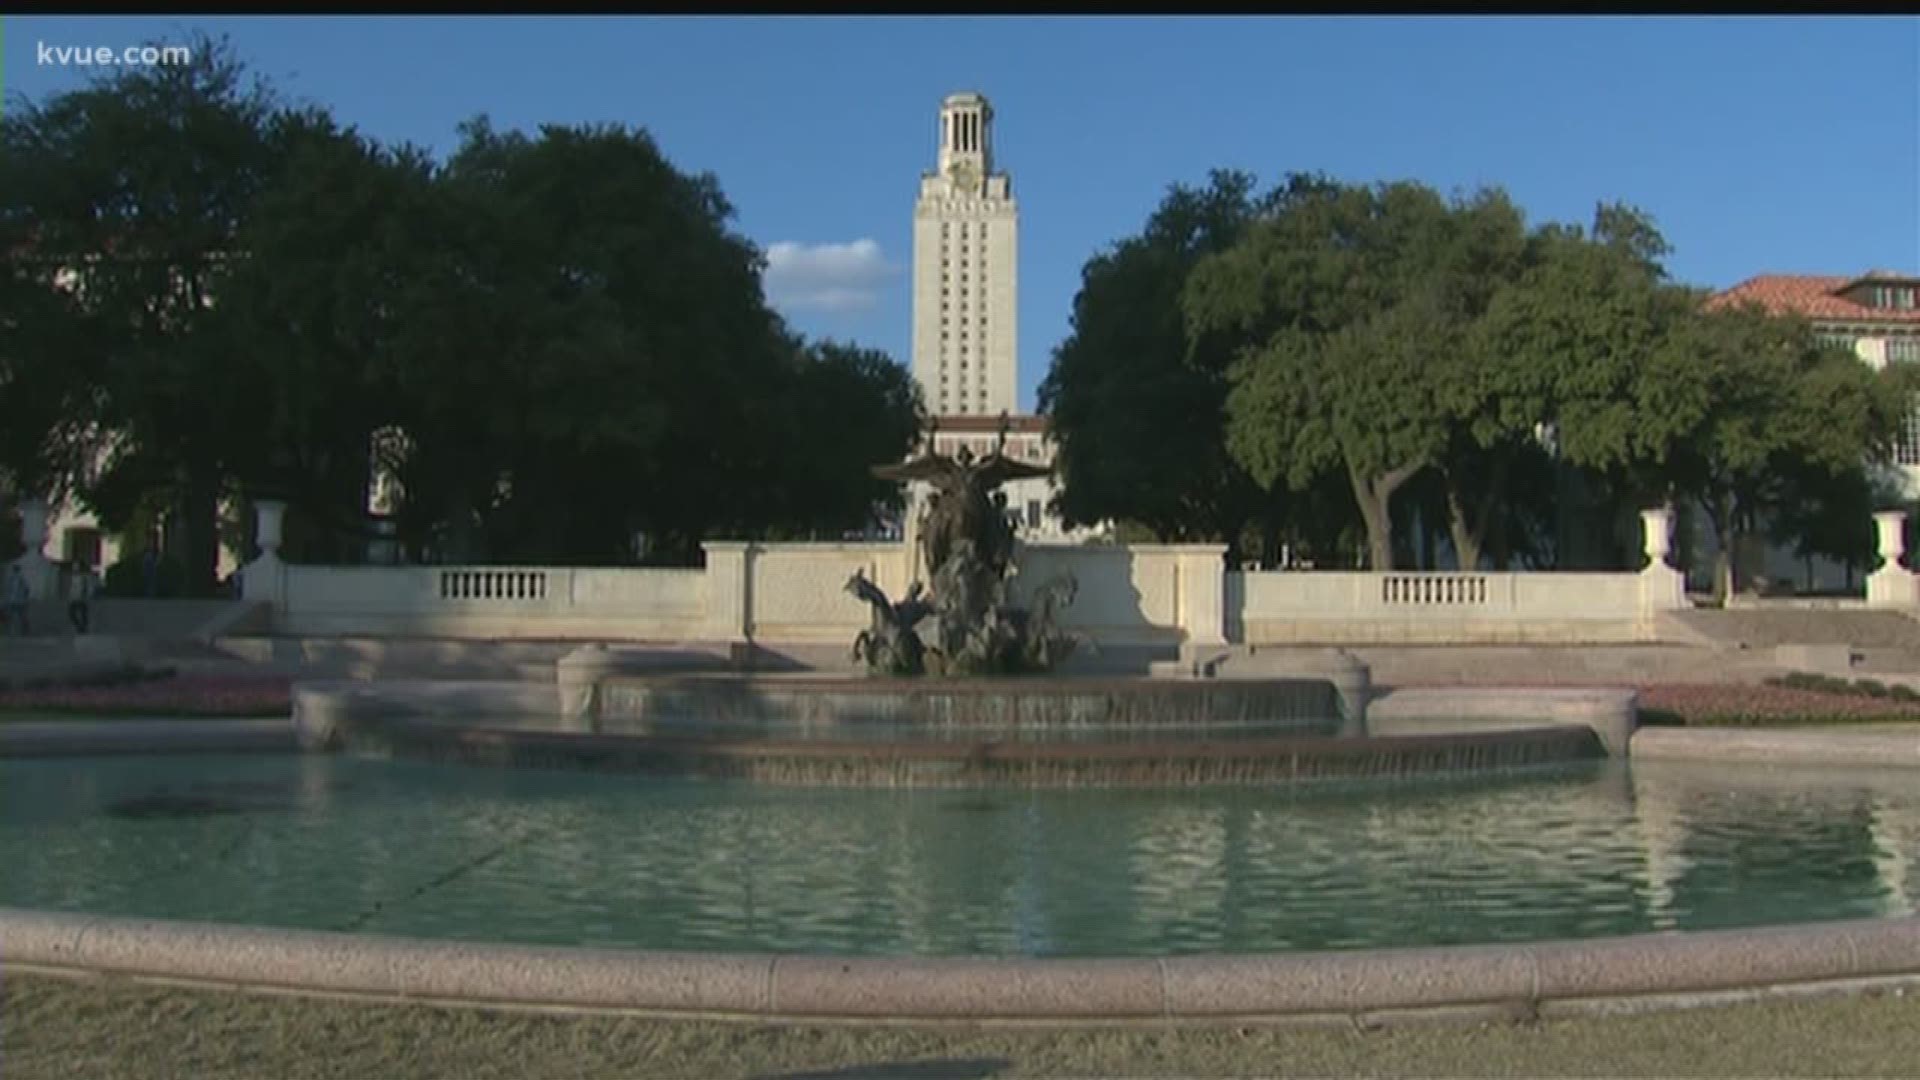 UT is working on how it will move forward with the fall semester.